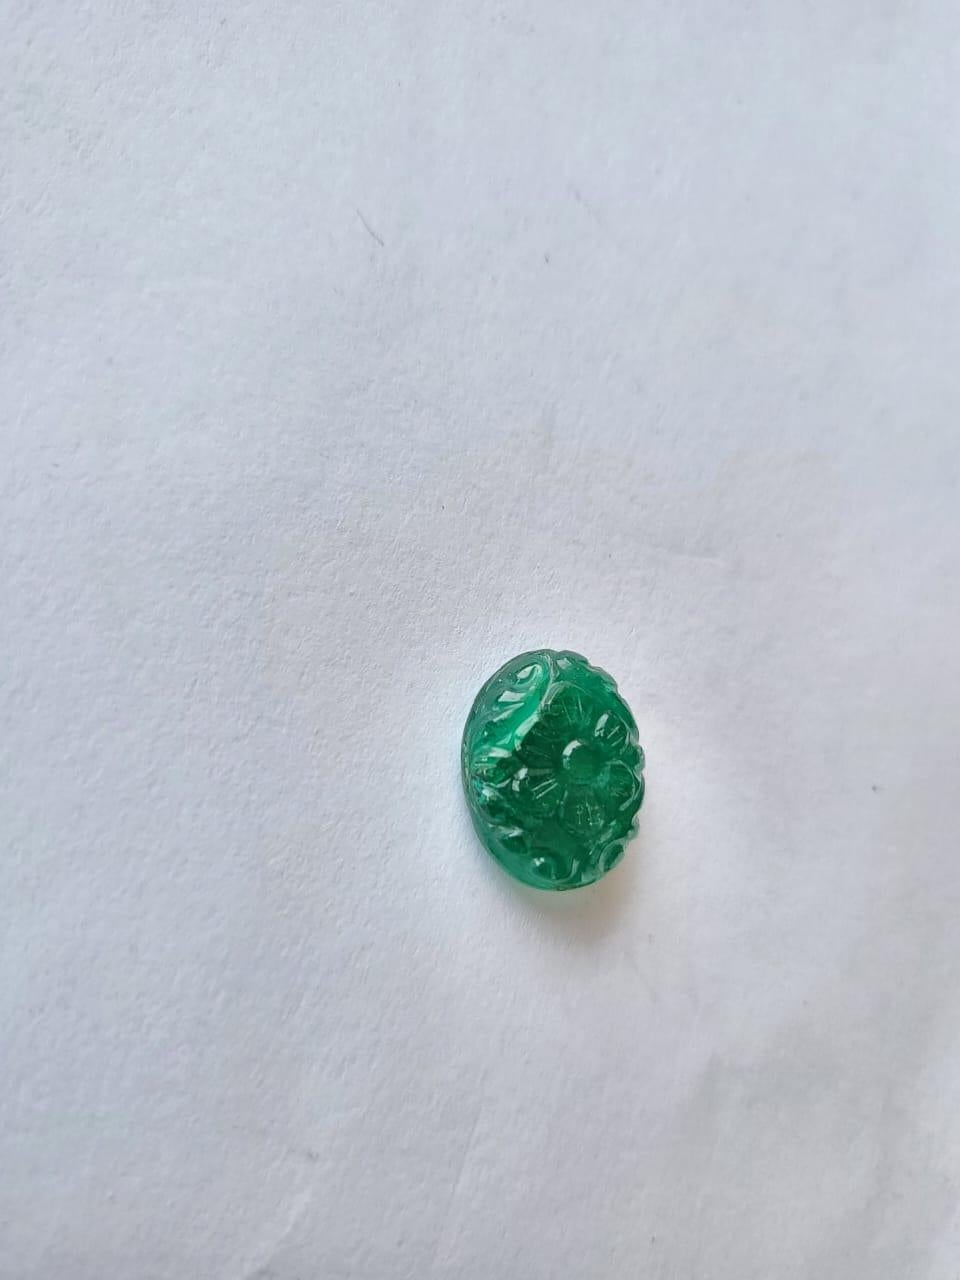 Elegant Emerald Carving Oval Cut Gemstone.
9.45 Carat with a elegant Green color and excellent clarity. Also has an excellent fancy Oval cut with ideal polish to show great shine and color . It will look authentic in jewellery. The dimensions of the